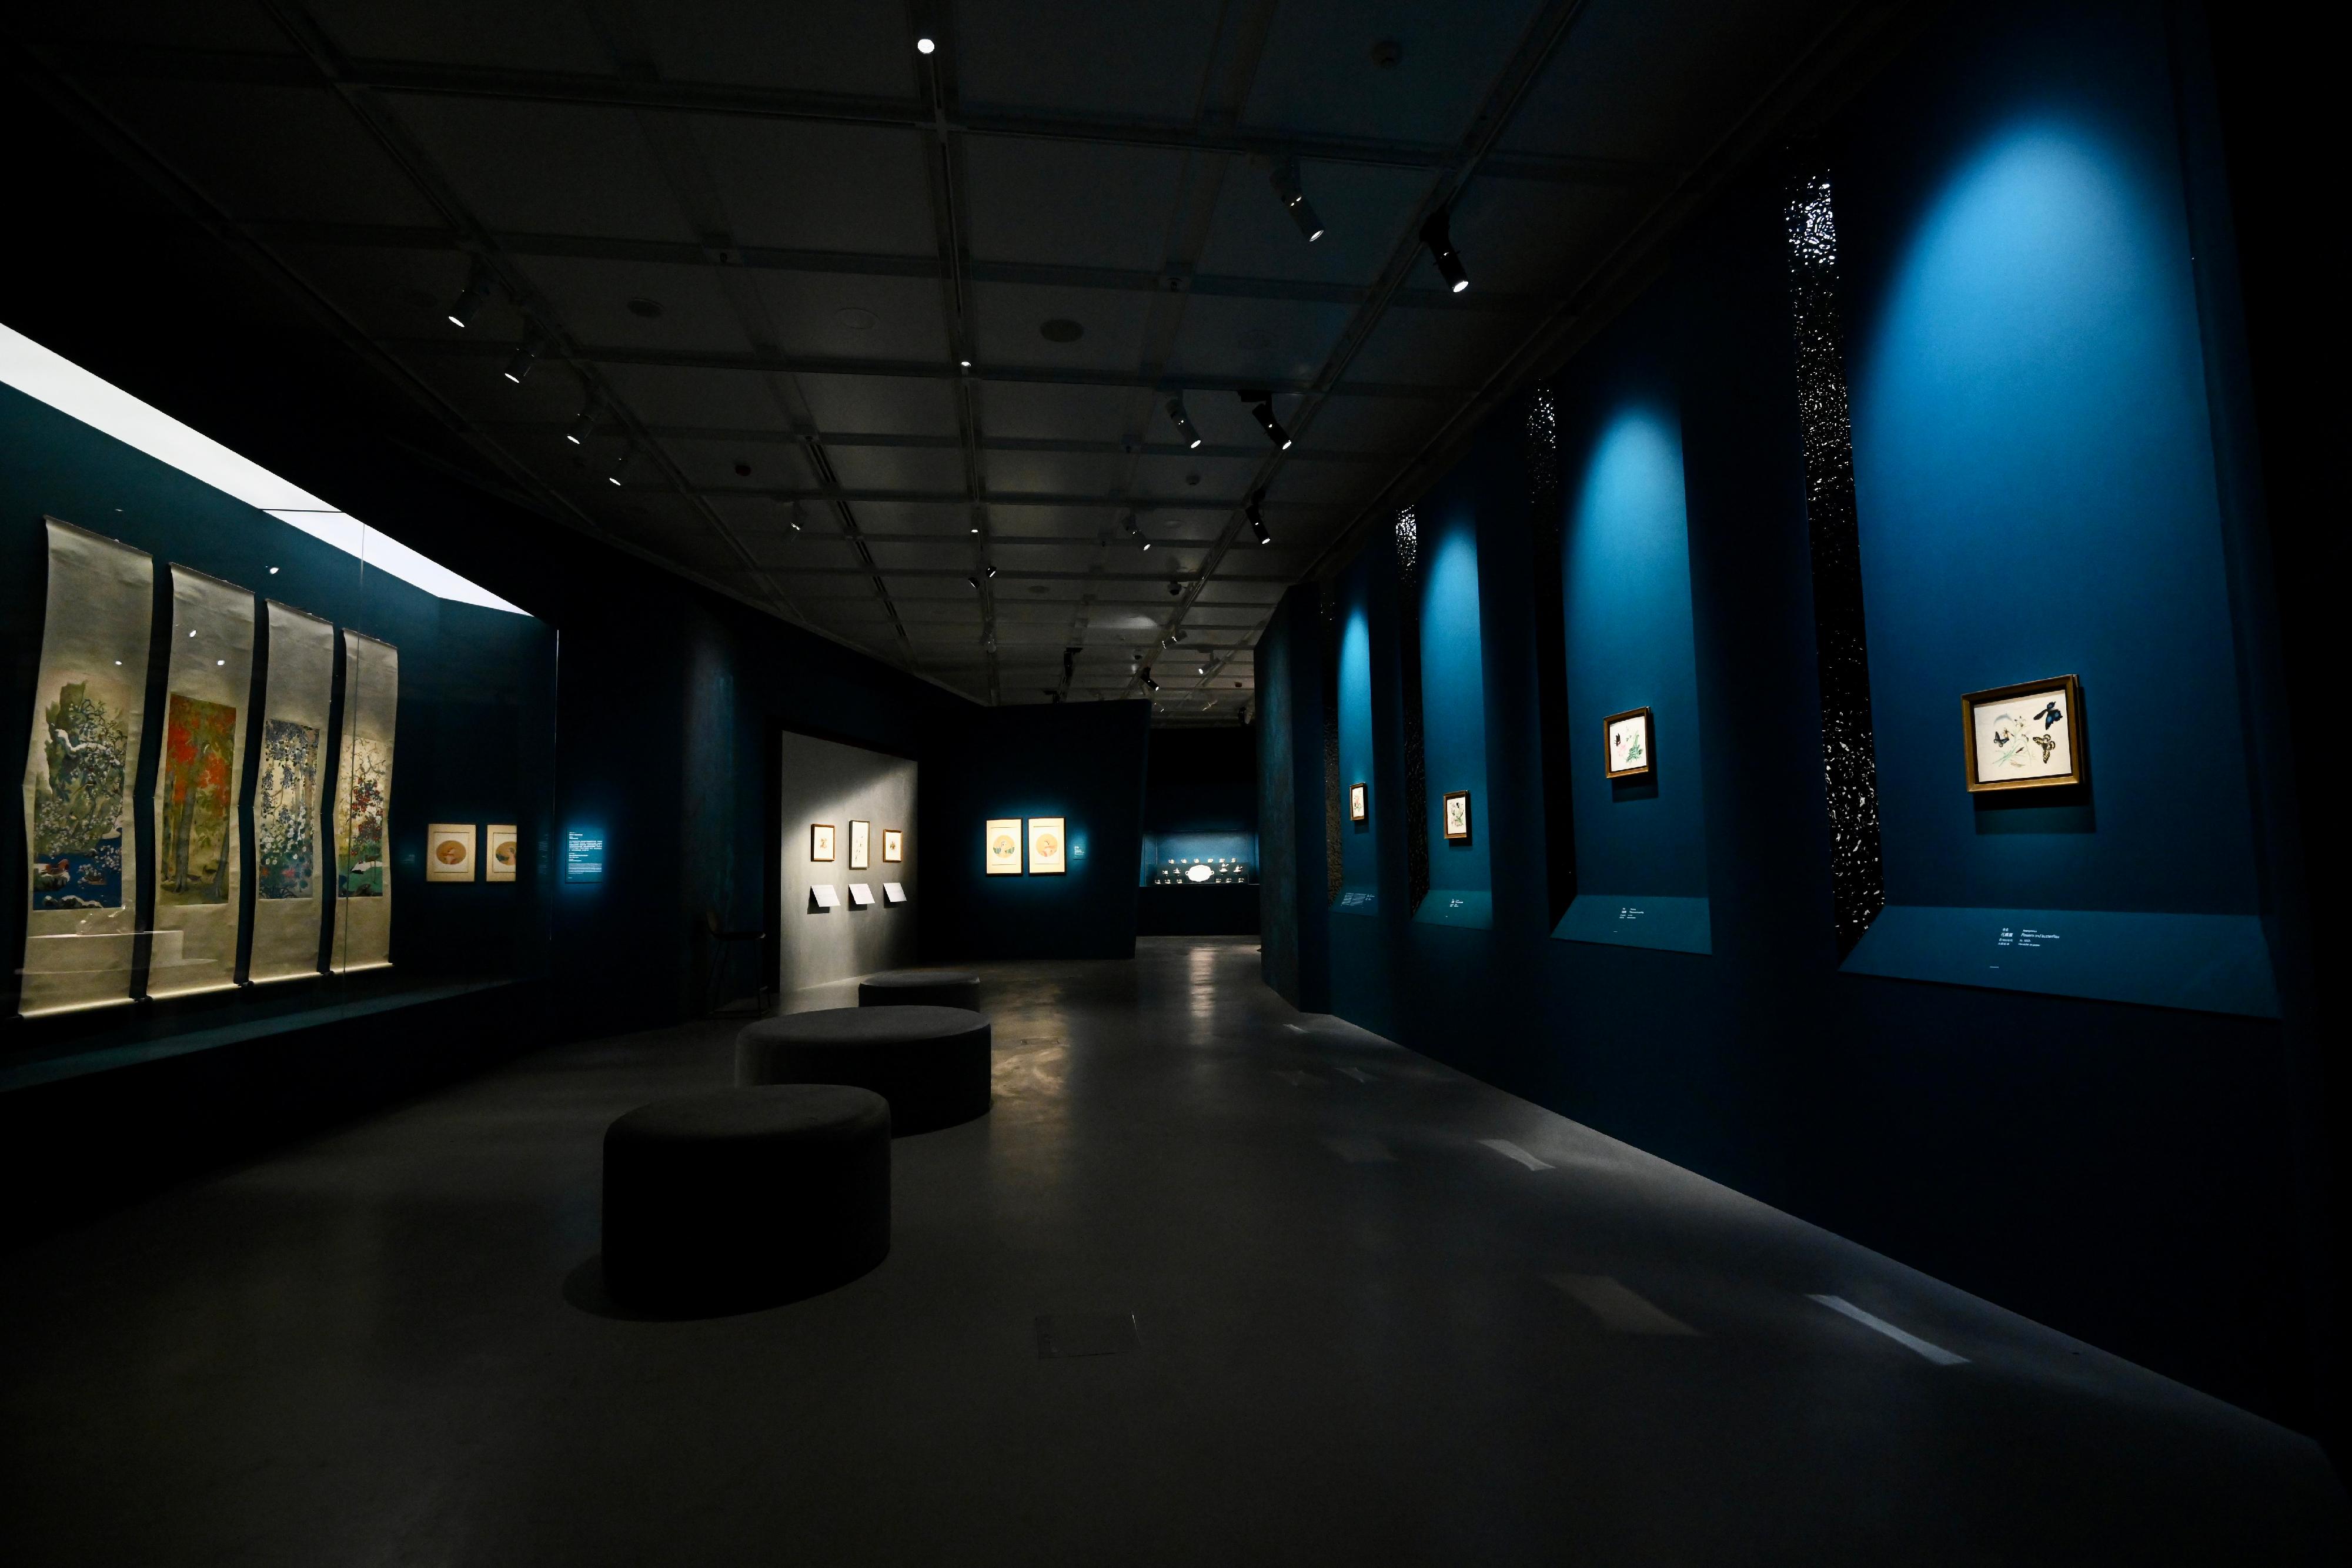 "Art Personalised: Masterpieces from the Hong Kong Museum of Art" exhibition will be held at the Hong Kong Museum of Art from tomorrow (June 30). Visitors may first take a personality test and look for their "recommended artworks" on display in different exhibition zones, to embark on a unique and personalised aesthetic journey.
